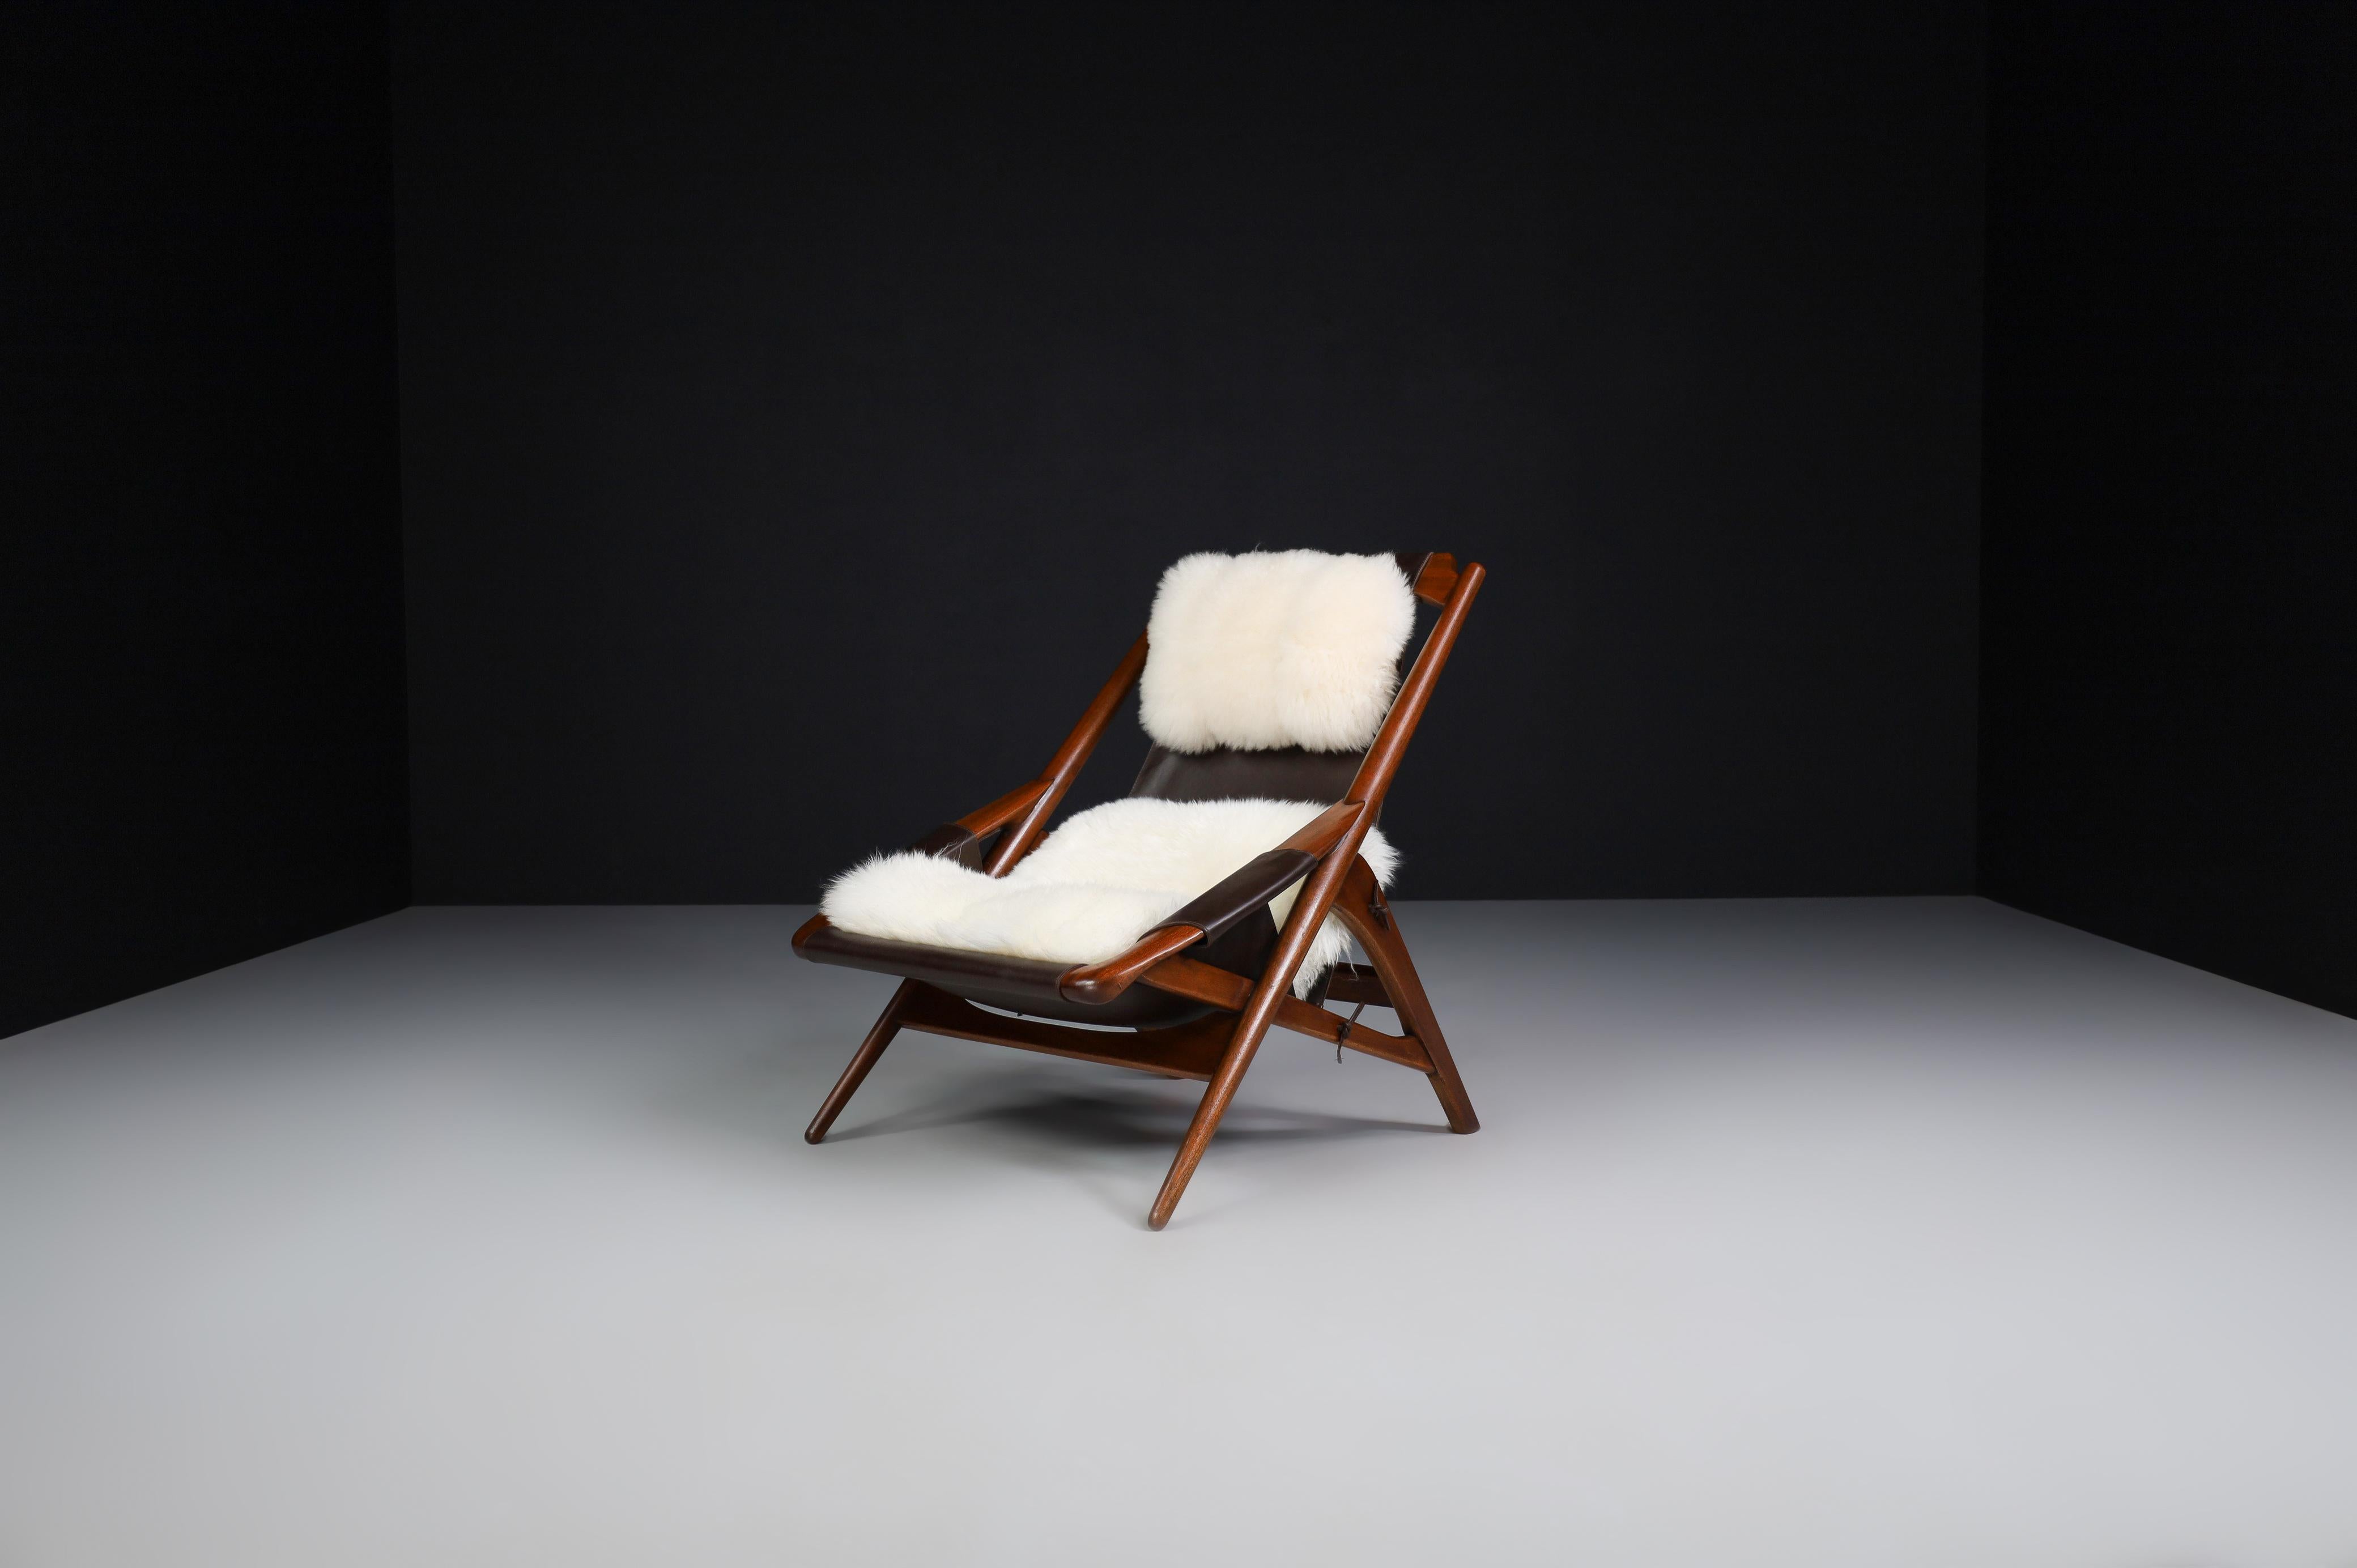 W.D. Andersag Lounge Chairs Teak and Leather, Italy, 1959 For Sale 4